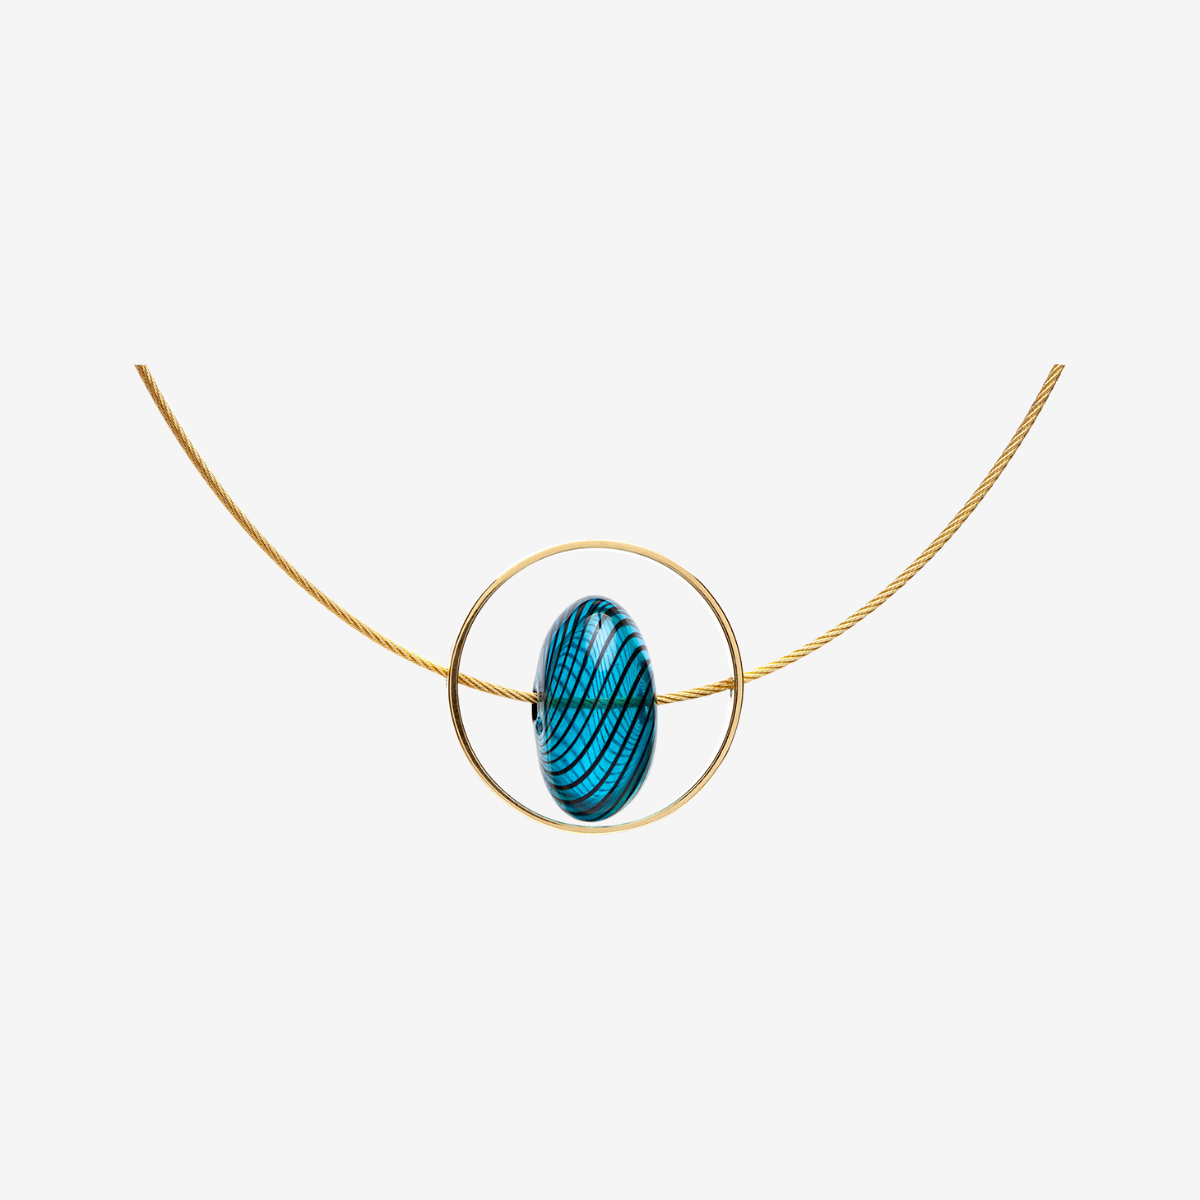 Xar handmade necklace in 18k gold plated 925 silver, blue glass and golden galvanized steel cable designed by Belen Bajo